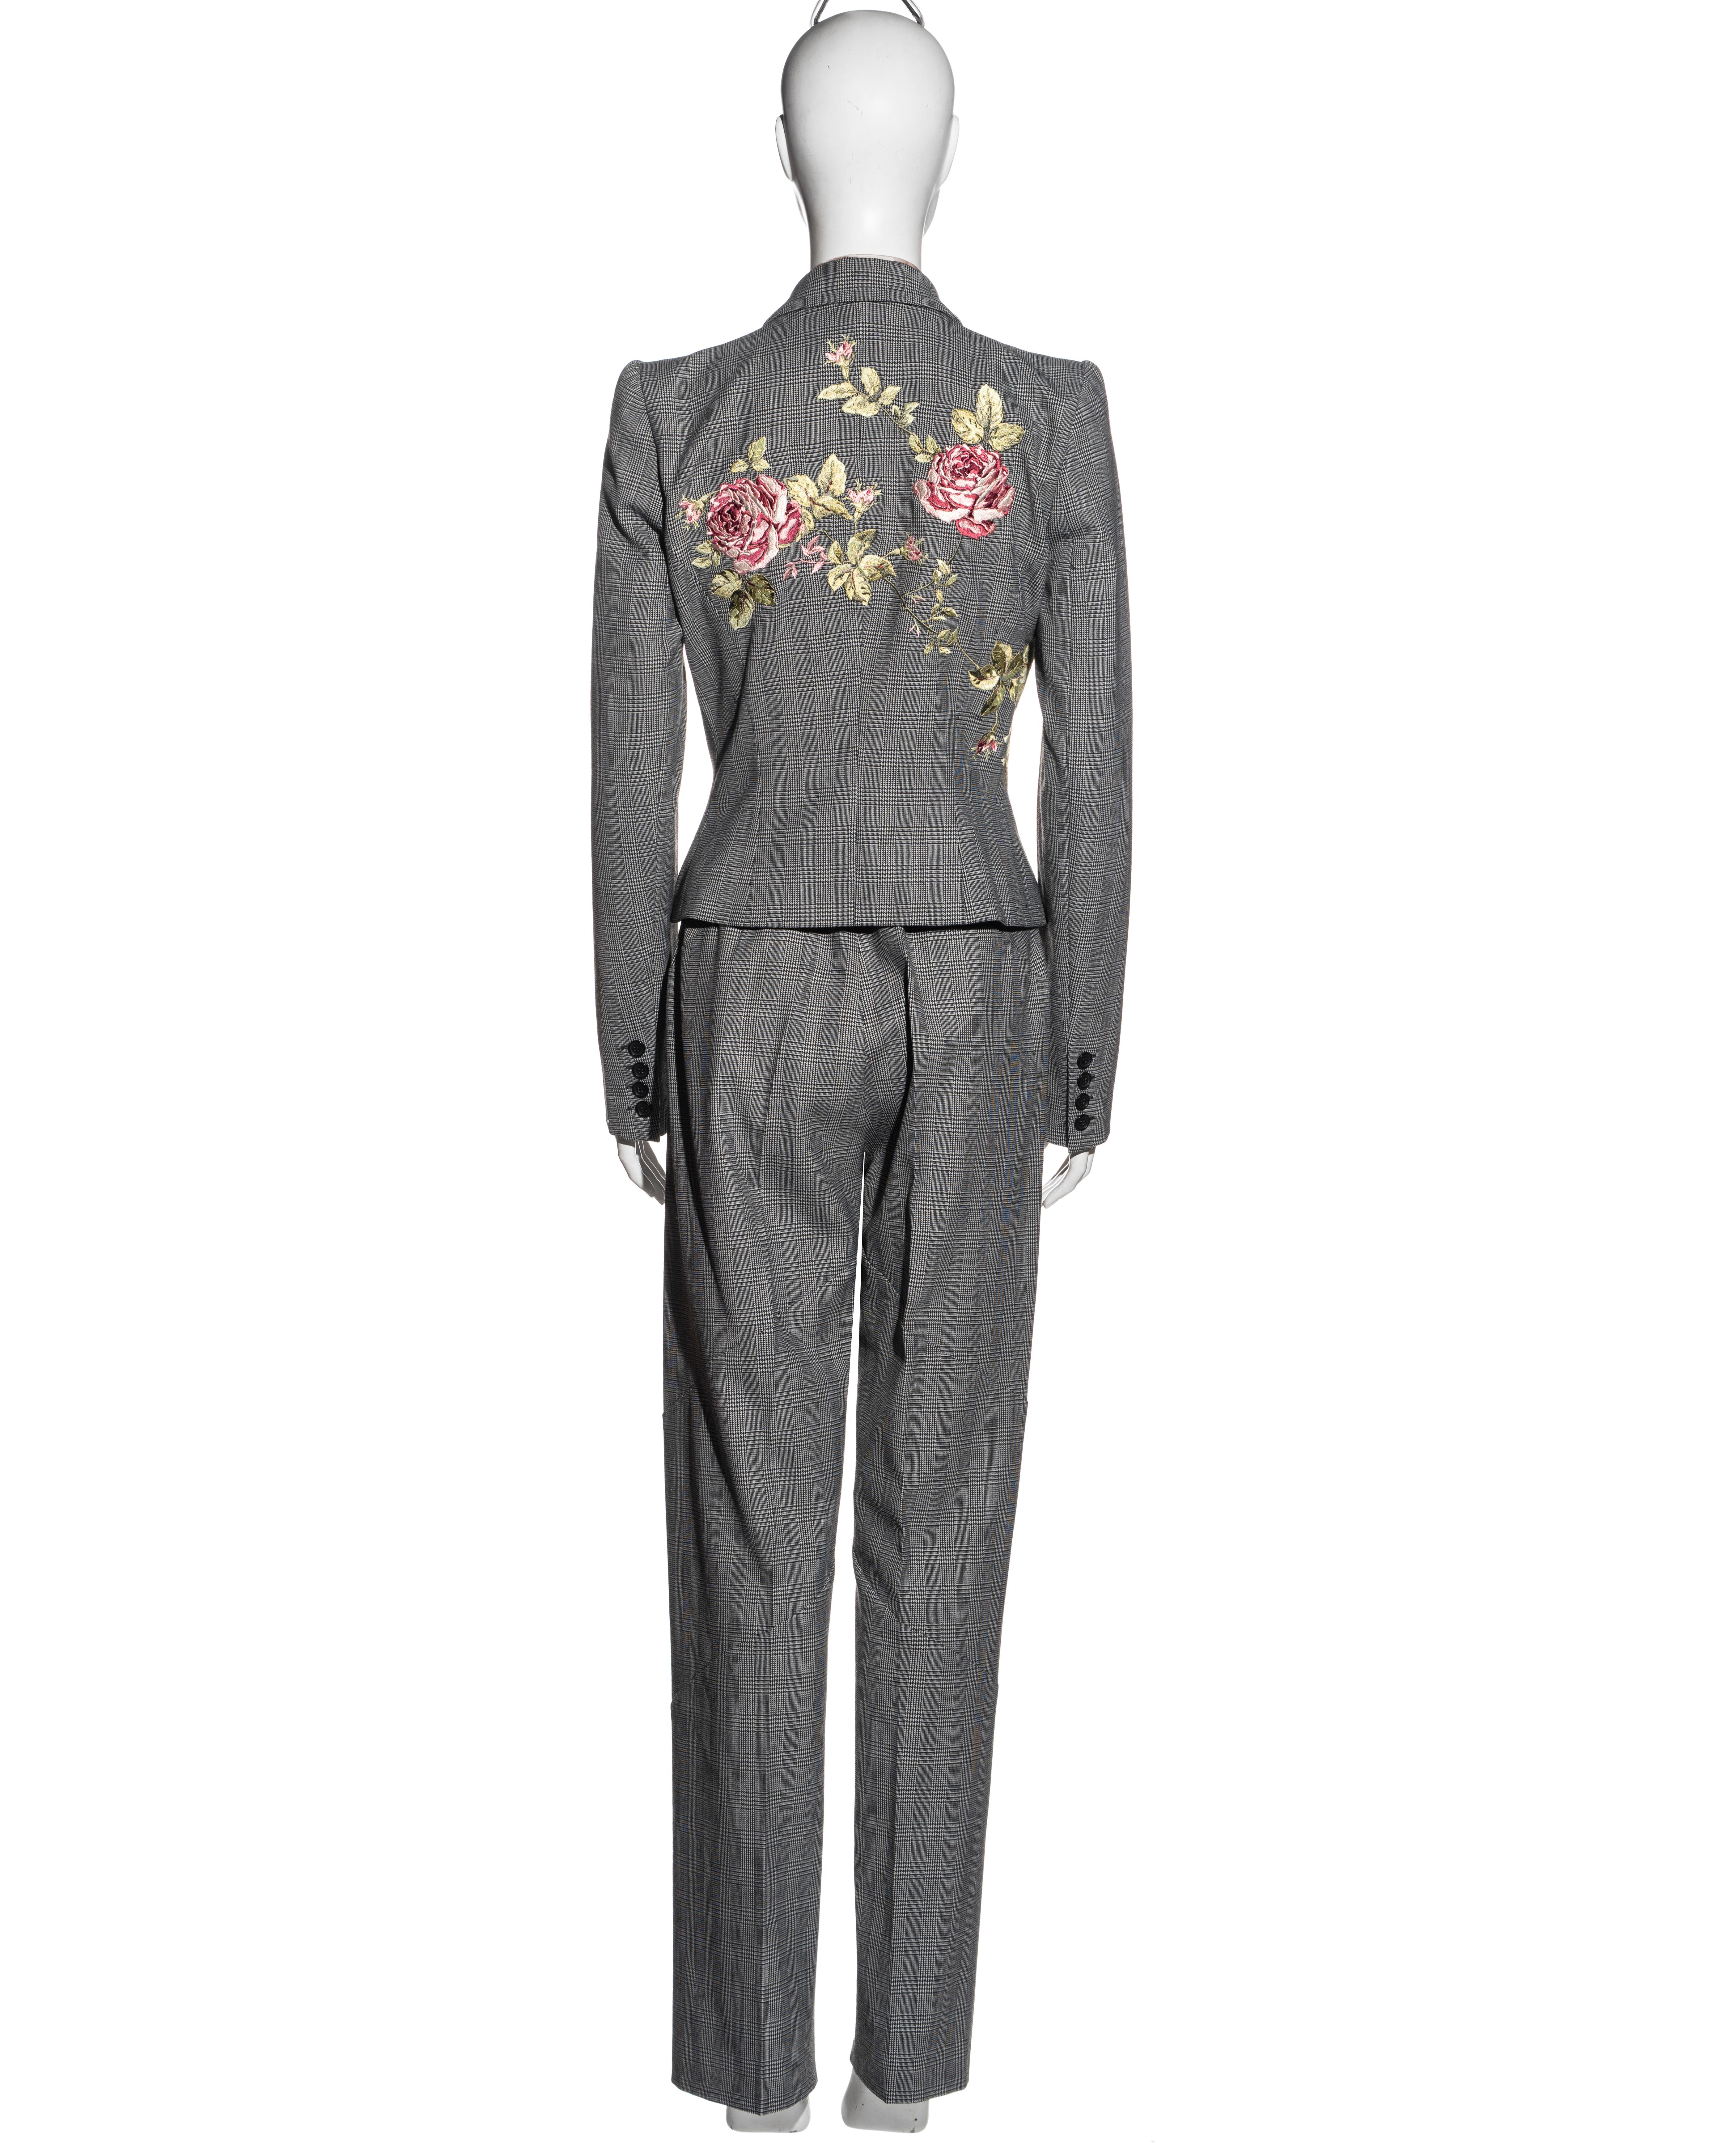 Women's Alexander McQueen Prince of Wales checked suit with rose embroidery, fw 1997 For Sale